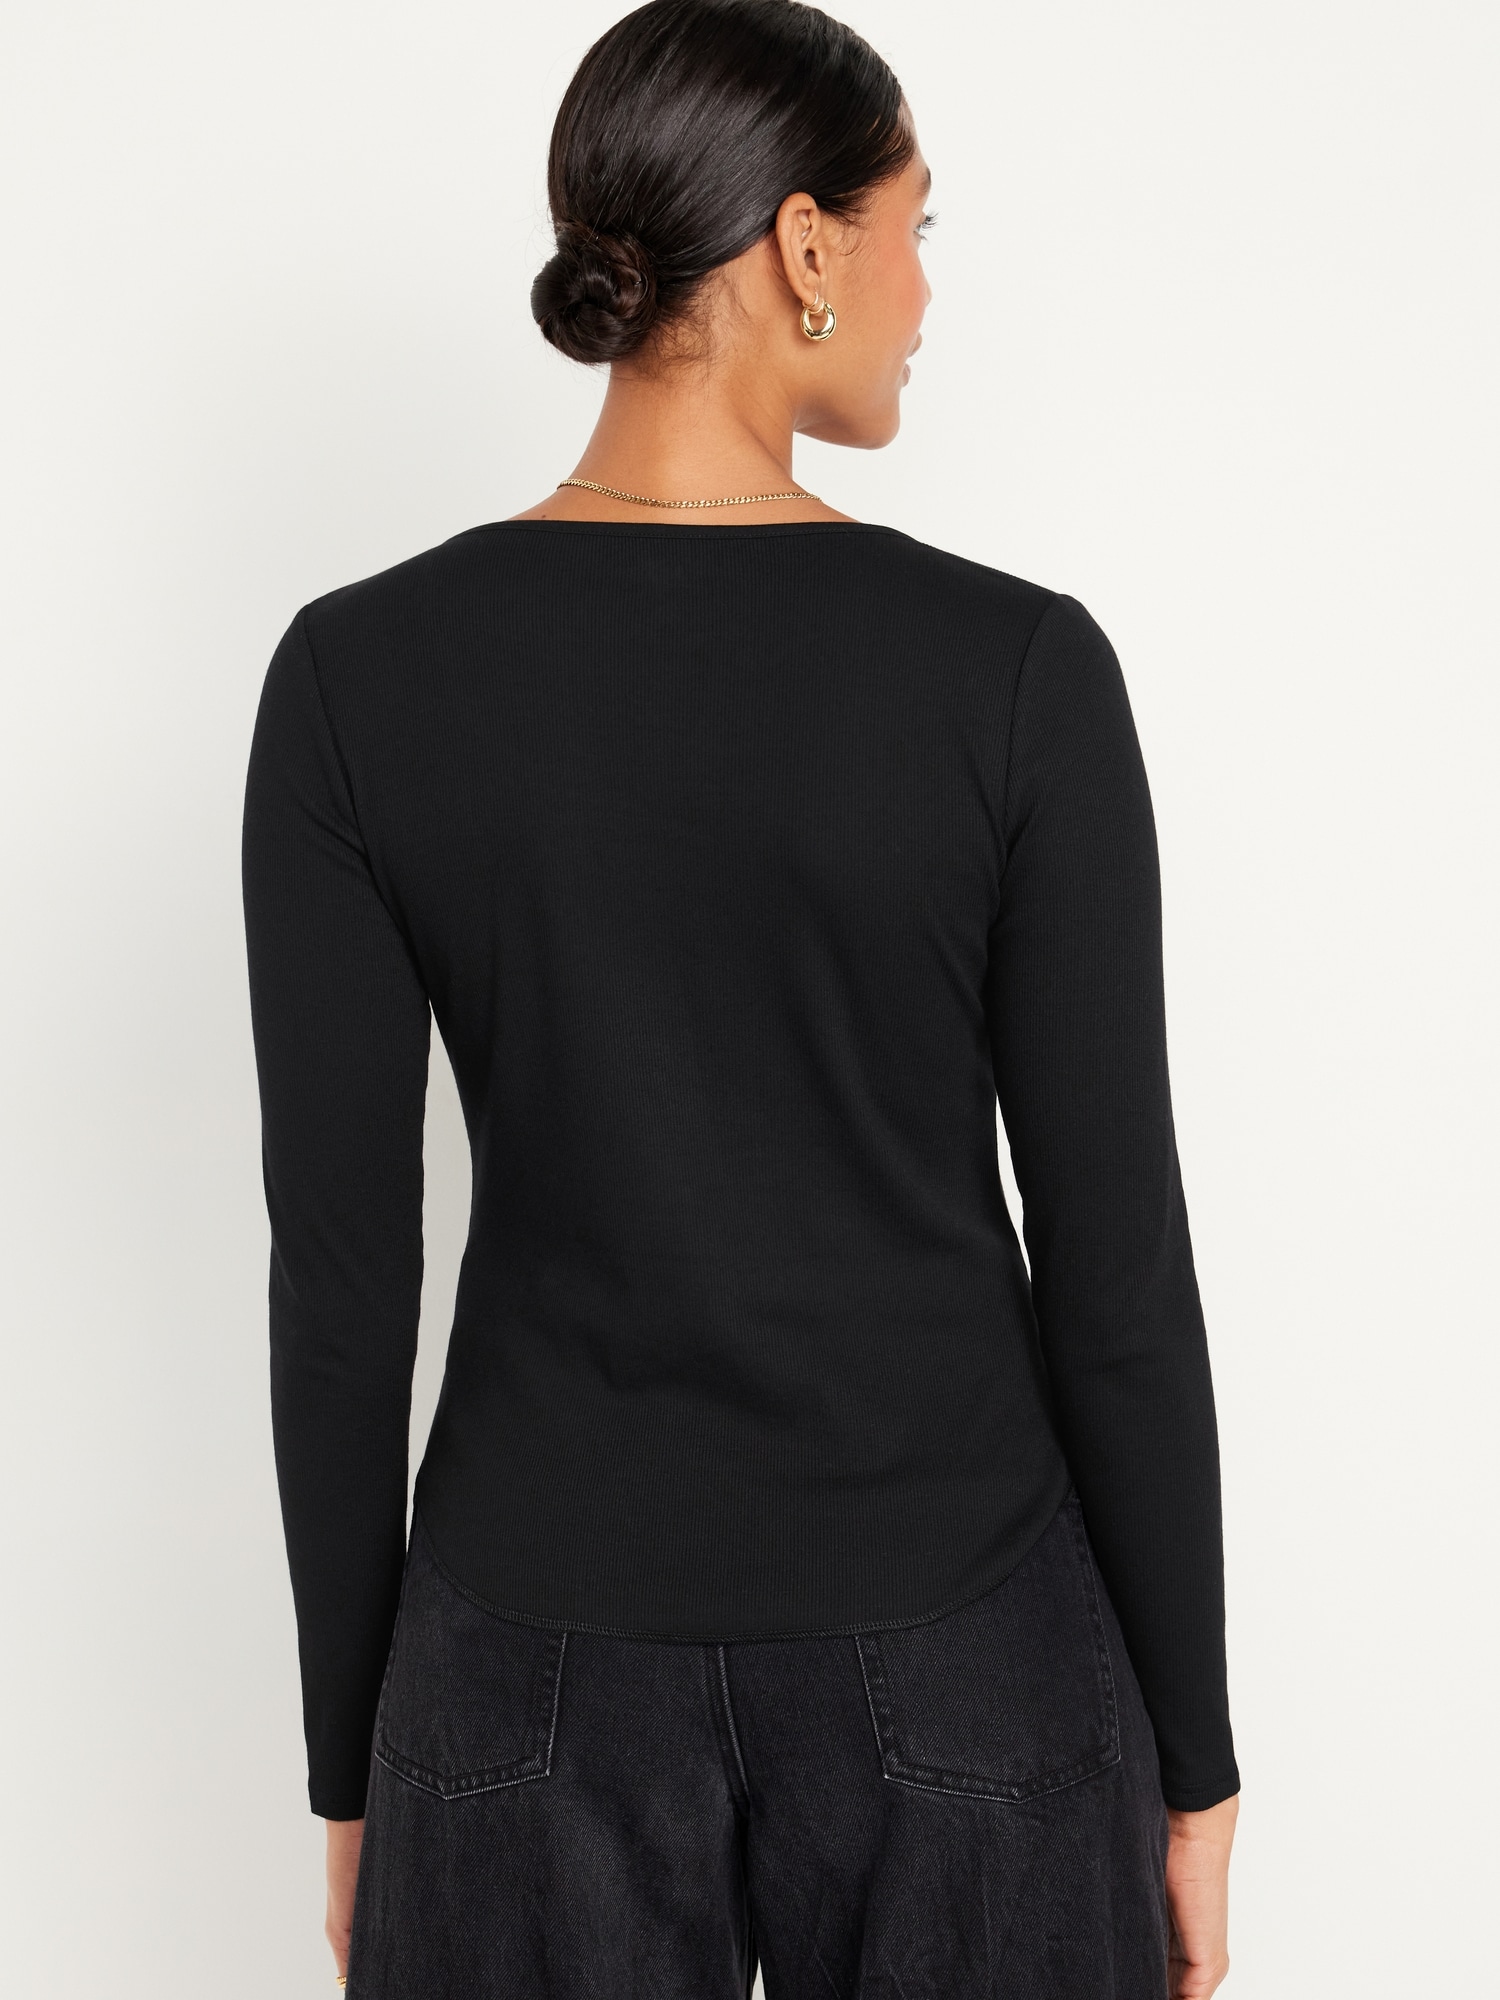 Fitted Rib-Knit T-Shirt | Long-Sleeve Old for Women Navy